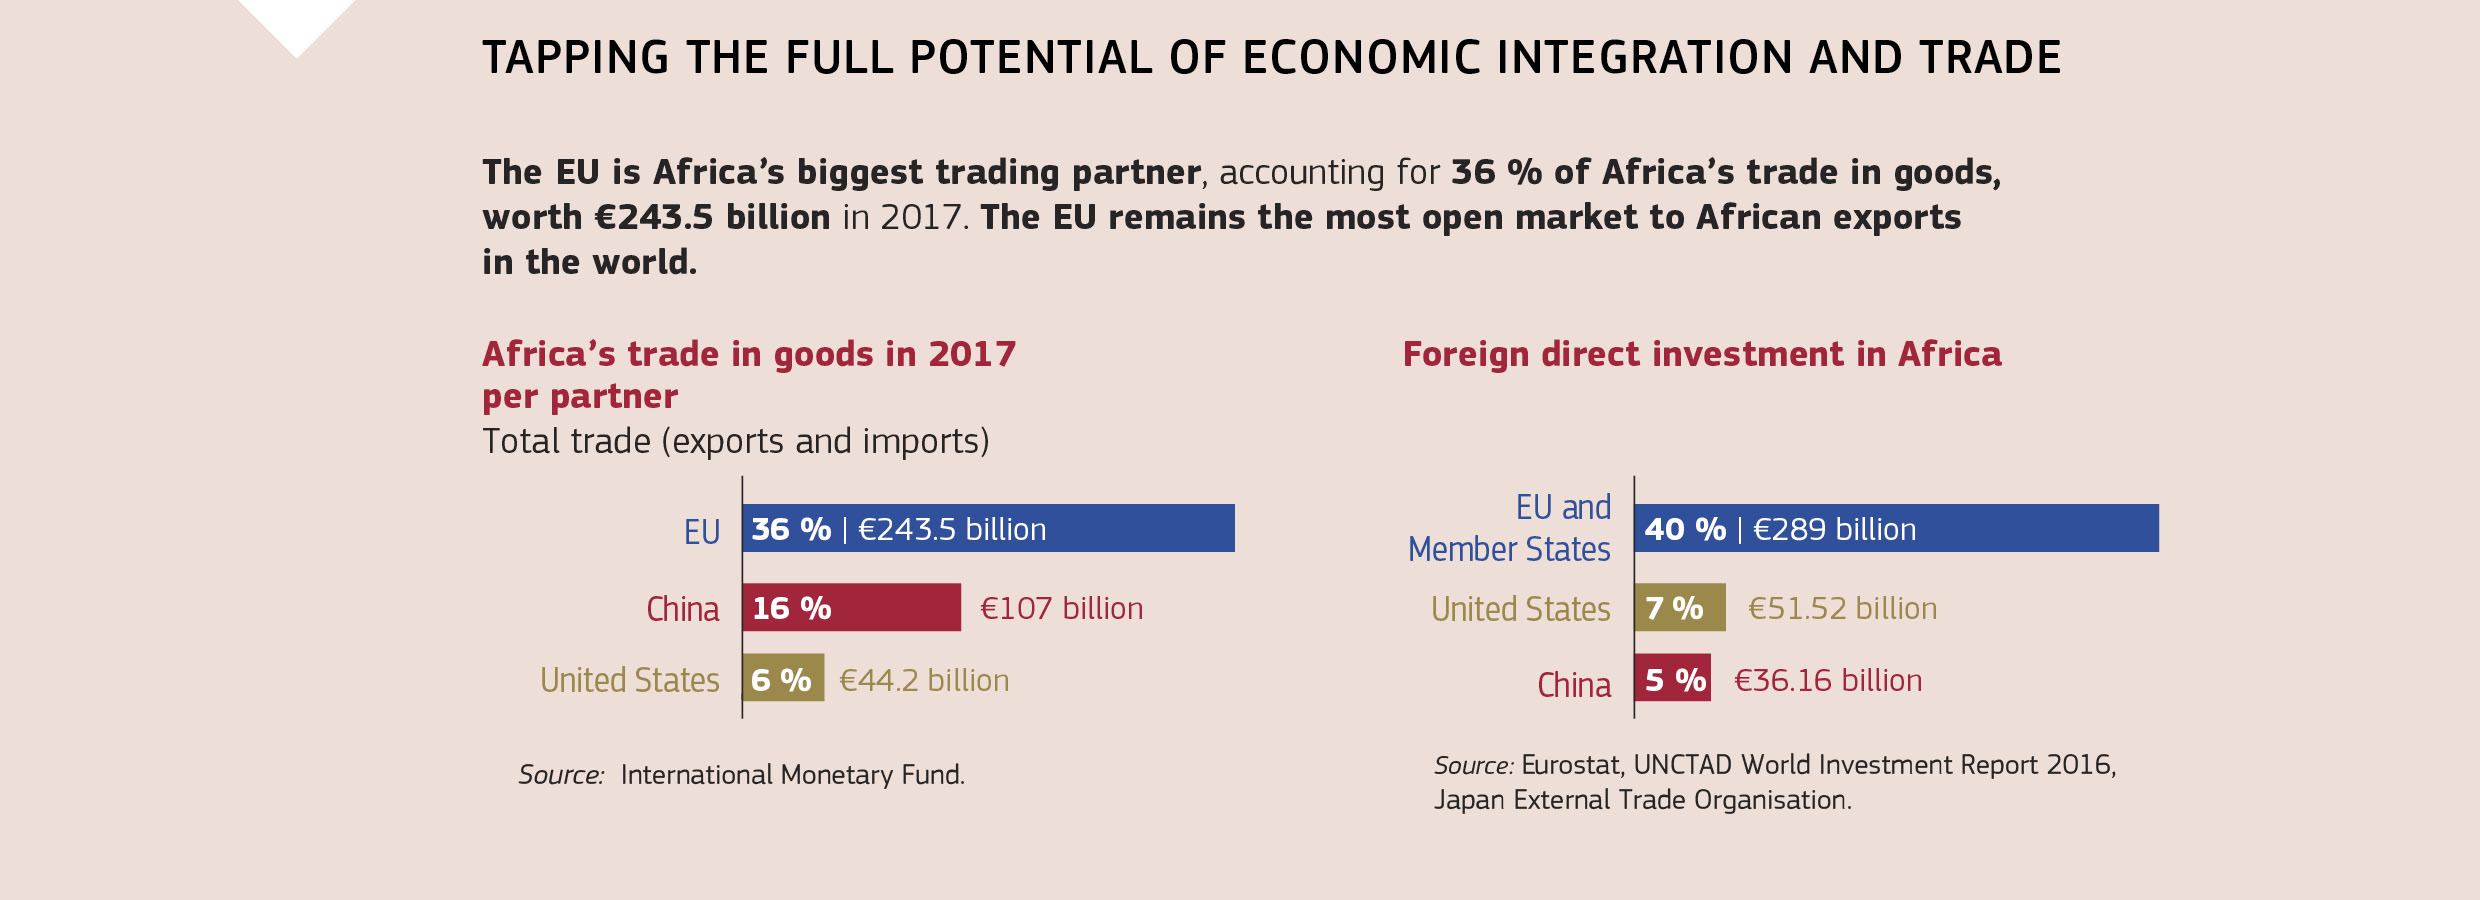 TAPPING THE FULL POTENTIAL OF ECONOMIC INTEGRATION AND TRADE